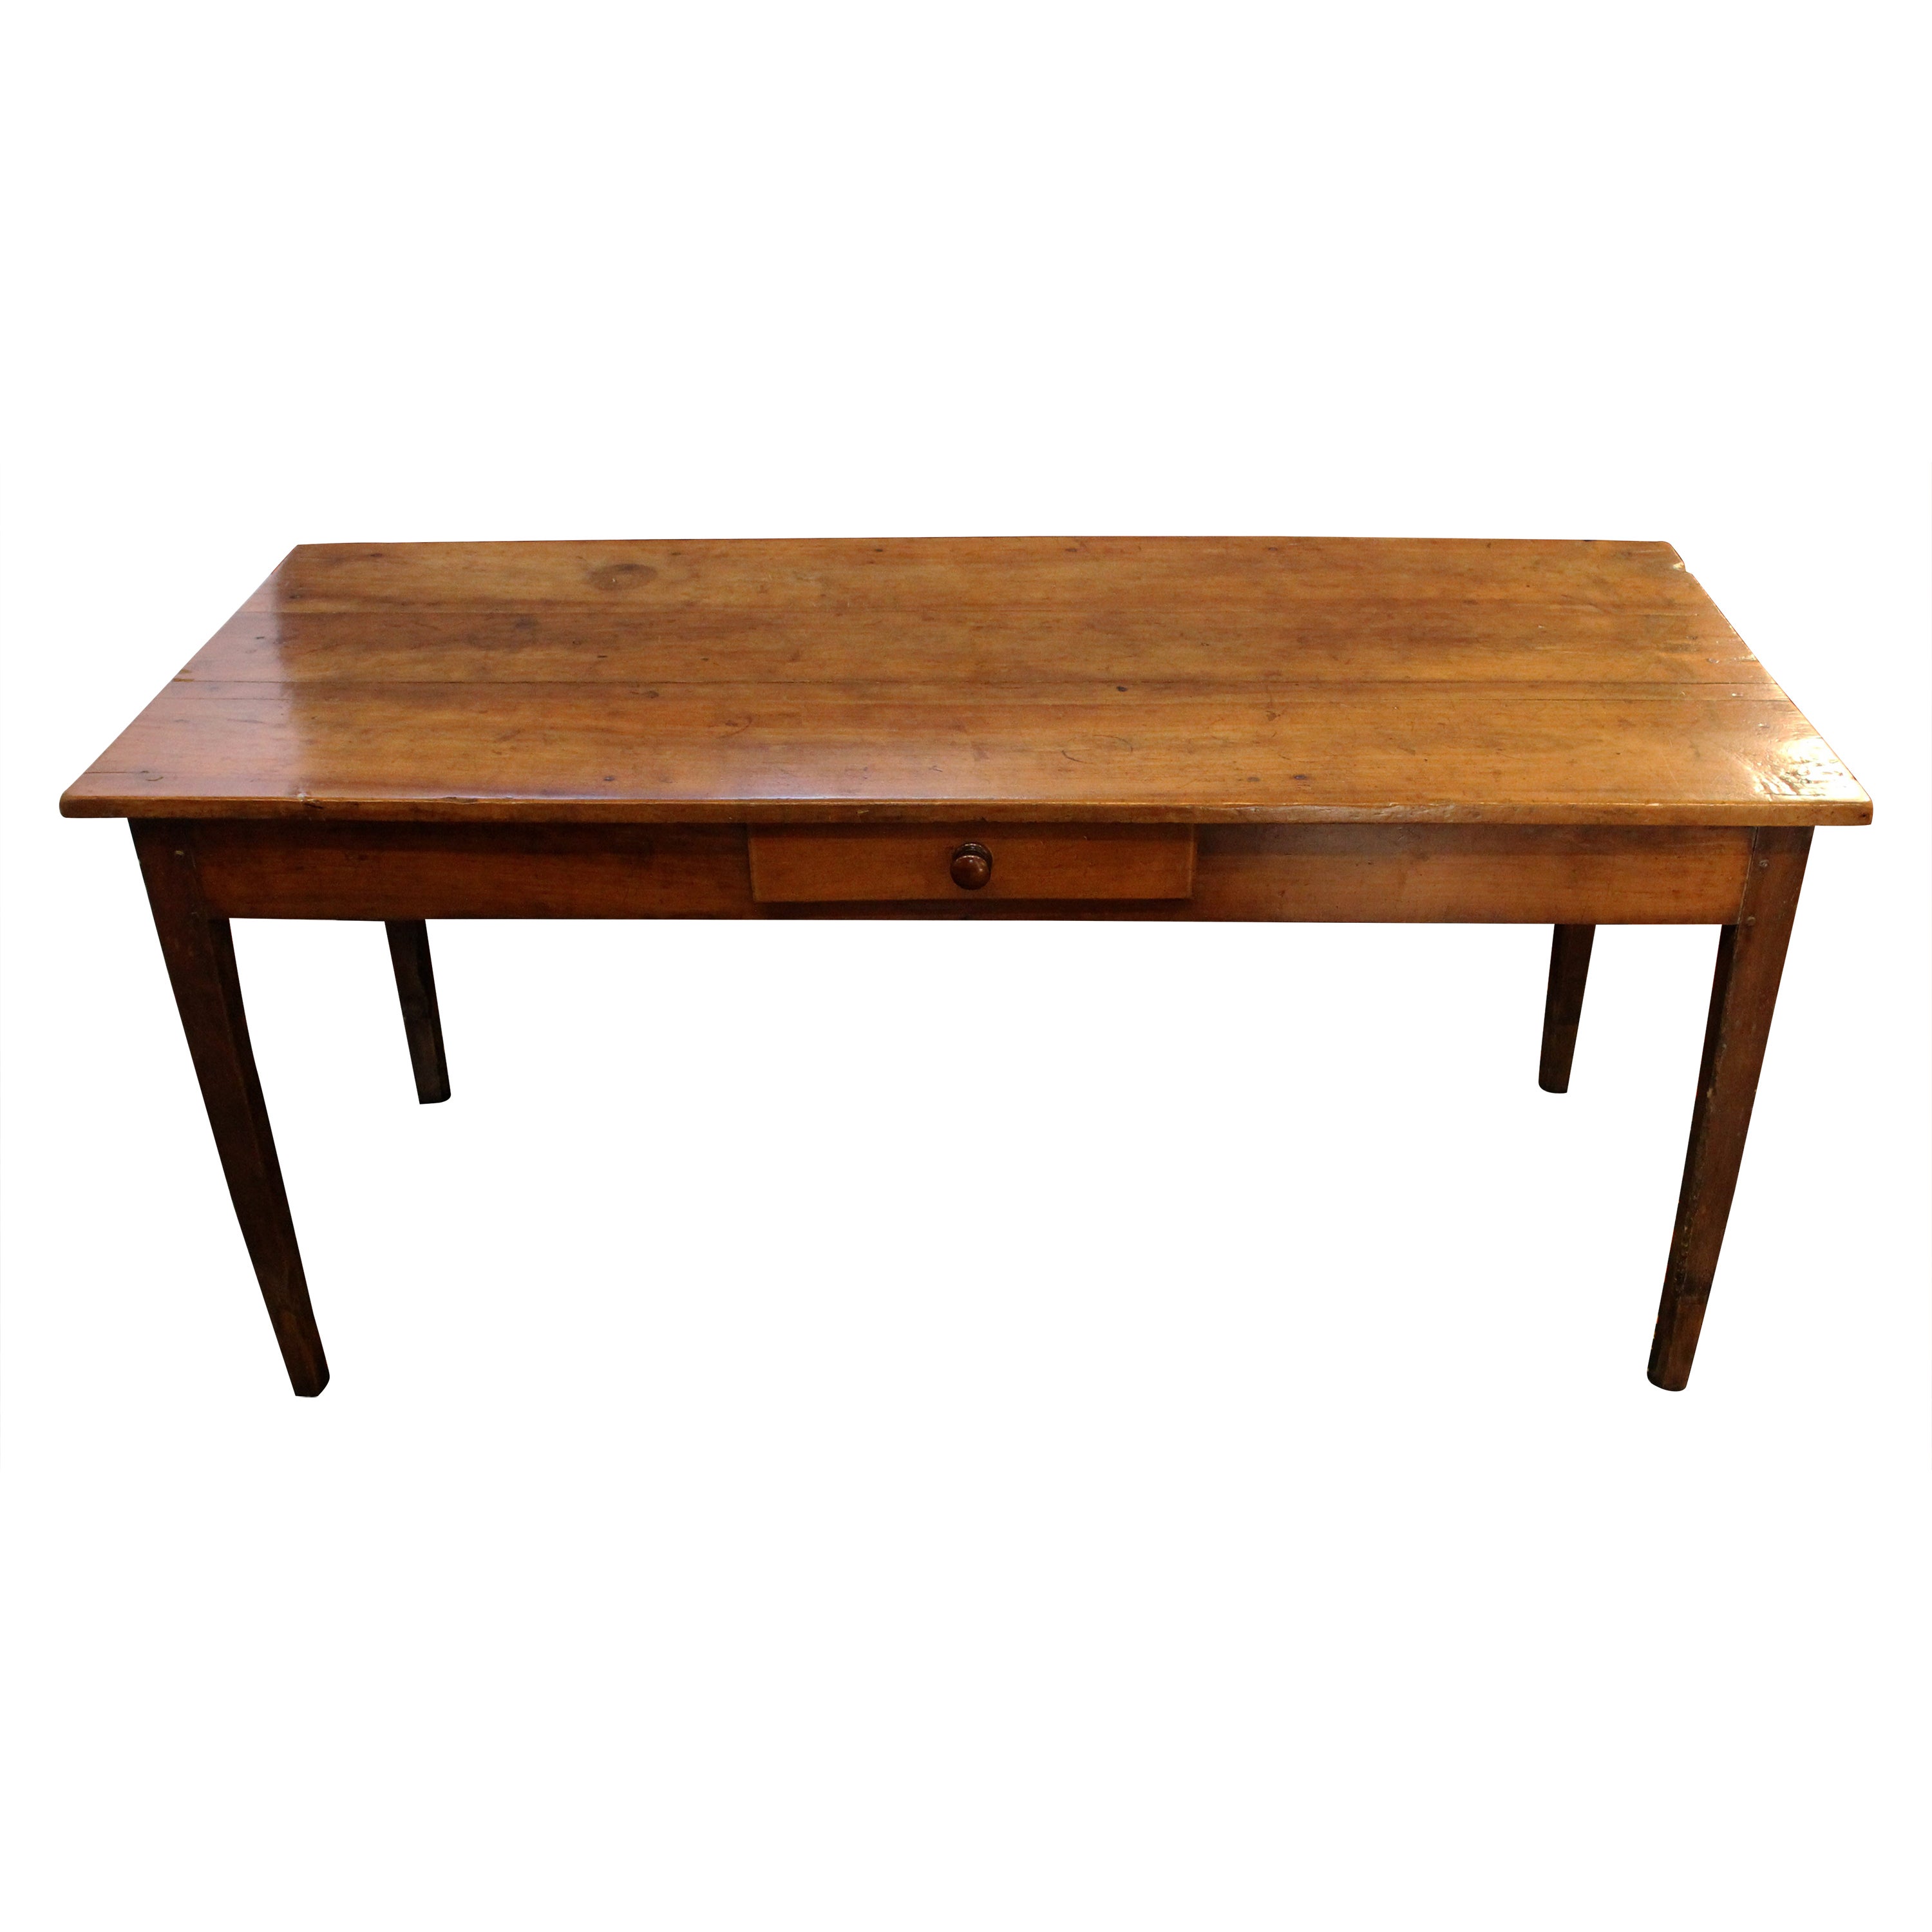 c. 1800 Country French Fruitwood Farm Table